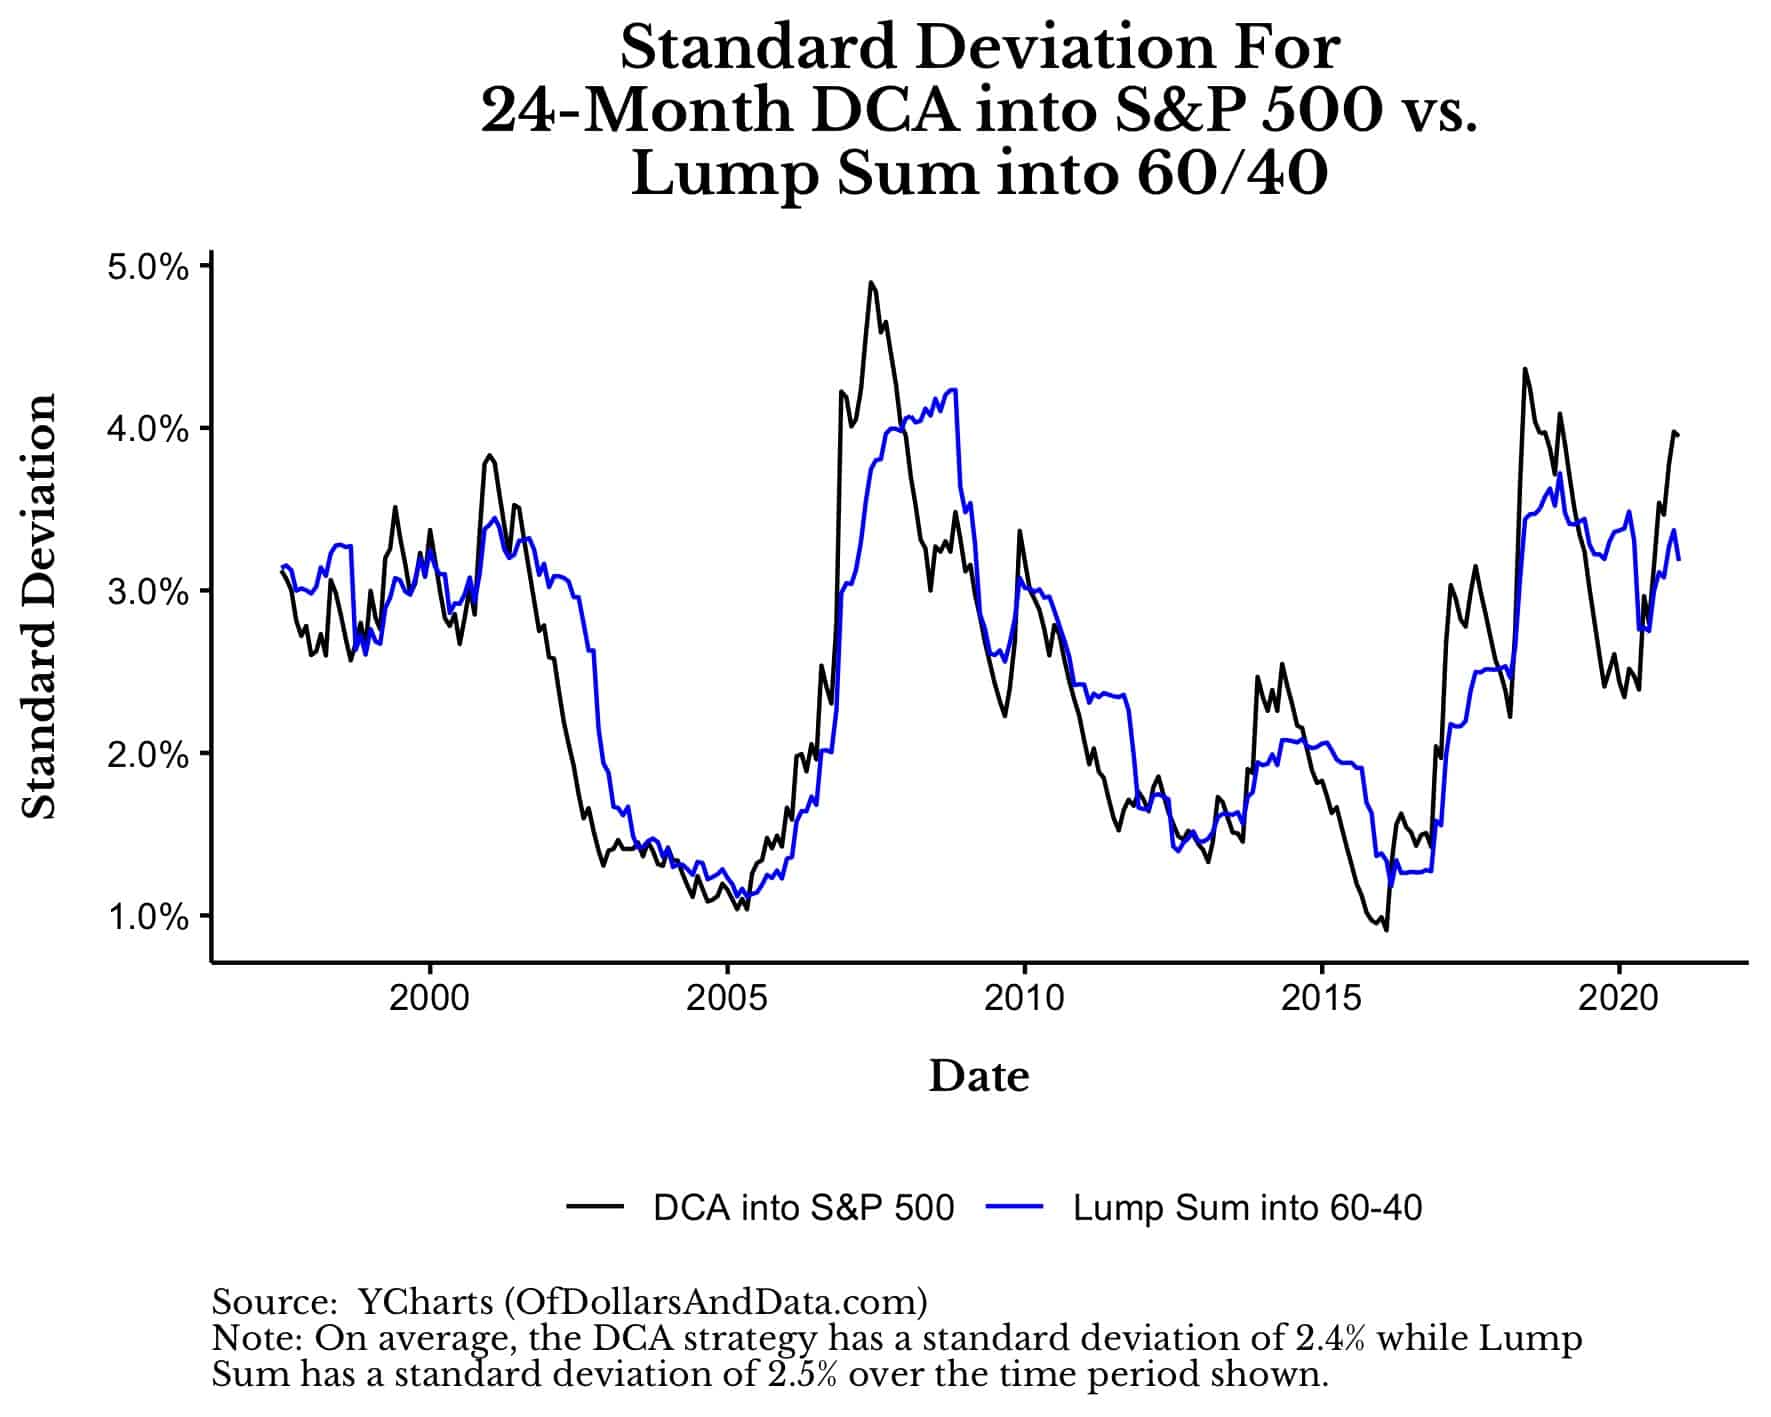 Standard deviation of DCA vs. Lump Sum performance into a 60/40 portfolio from the late 1990s to 2022.